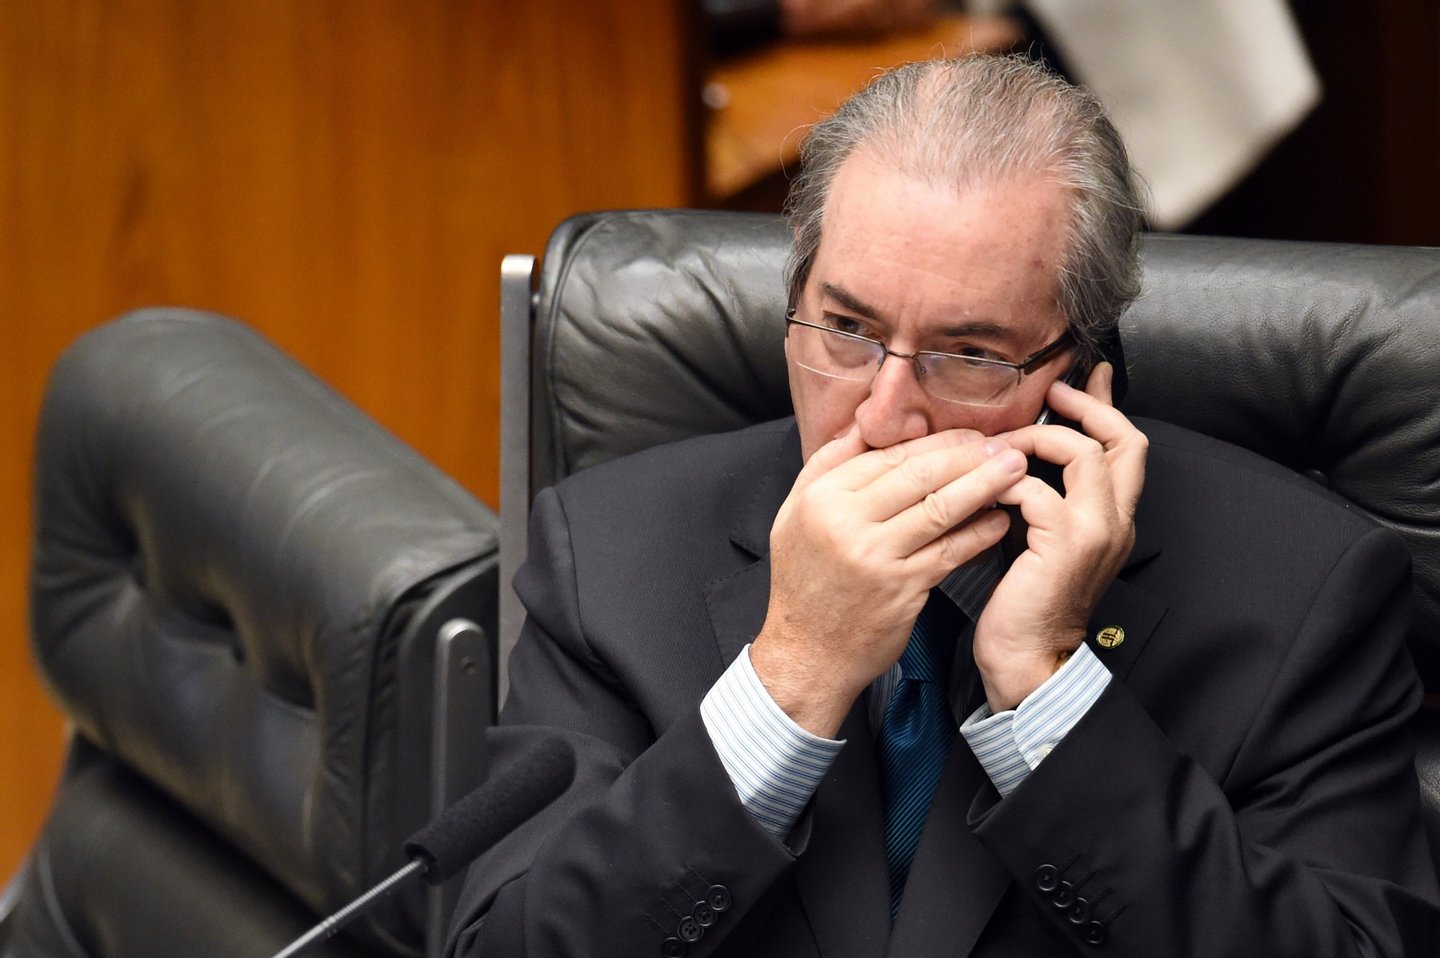 Eduardo Cunha, President of the Lower House of the Congress, speaks on a mobile phone during a session in Brasilia on April 16, 2016. Brazil's lower house of Congress opened debate Friday on impeachment of President Dilma Rousseff ahead of a vote this weekend that could seal her fate. Rousseff fought for her political life on Saturday, lobbying lawmakers to defeat a looming impeachment vote while lashing out at "corrupt" critics seeking to oust her. / AFP / EVARISTO SA (Photo credit should read EVARISTO SA/AFP/Getty Images)